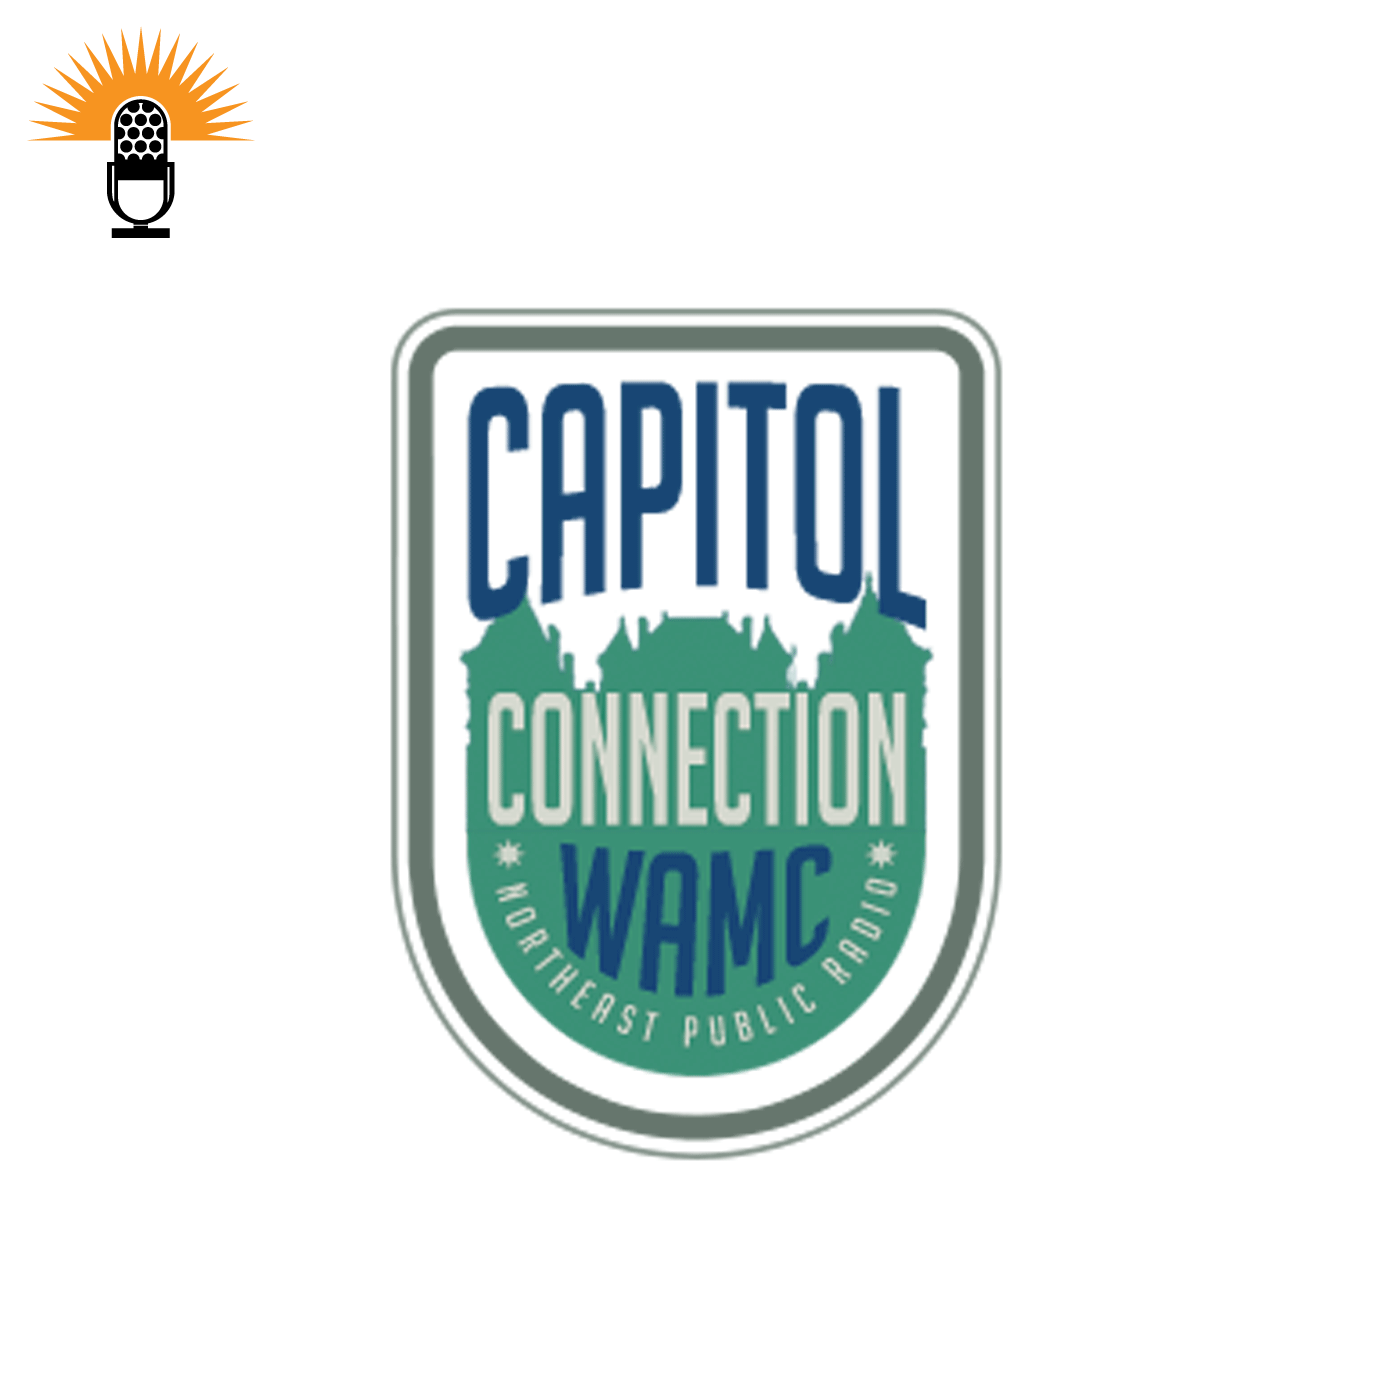 The Capitol Connection #2329 - Vanessa Fajans-Turner, Executive Director of Environmental Advocates New York